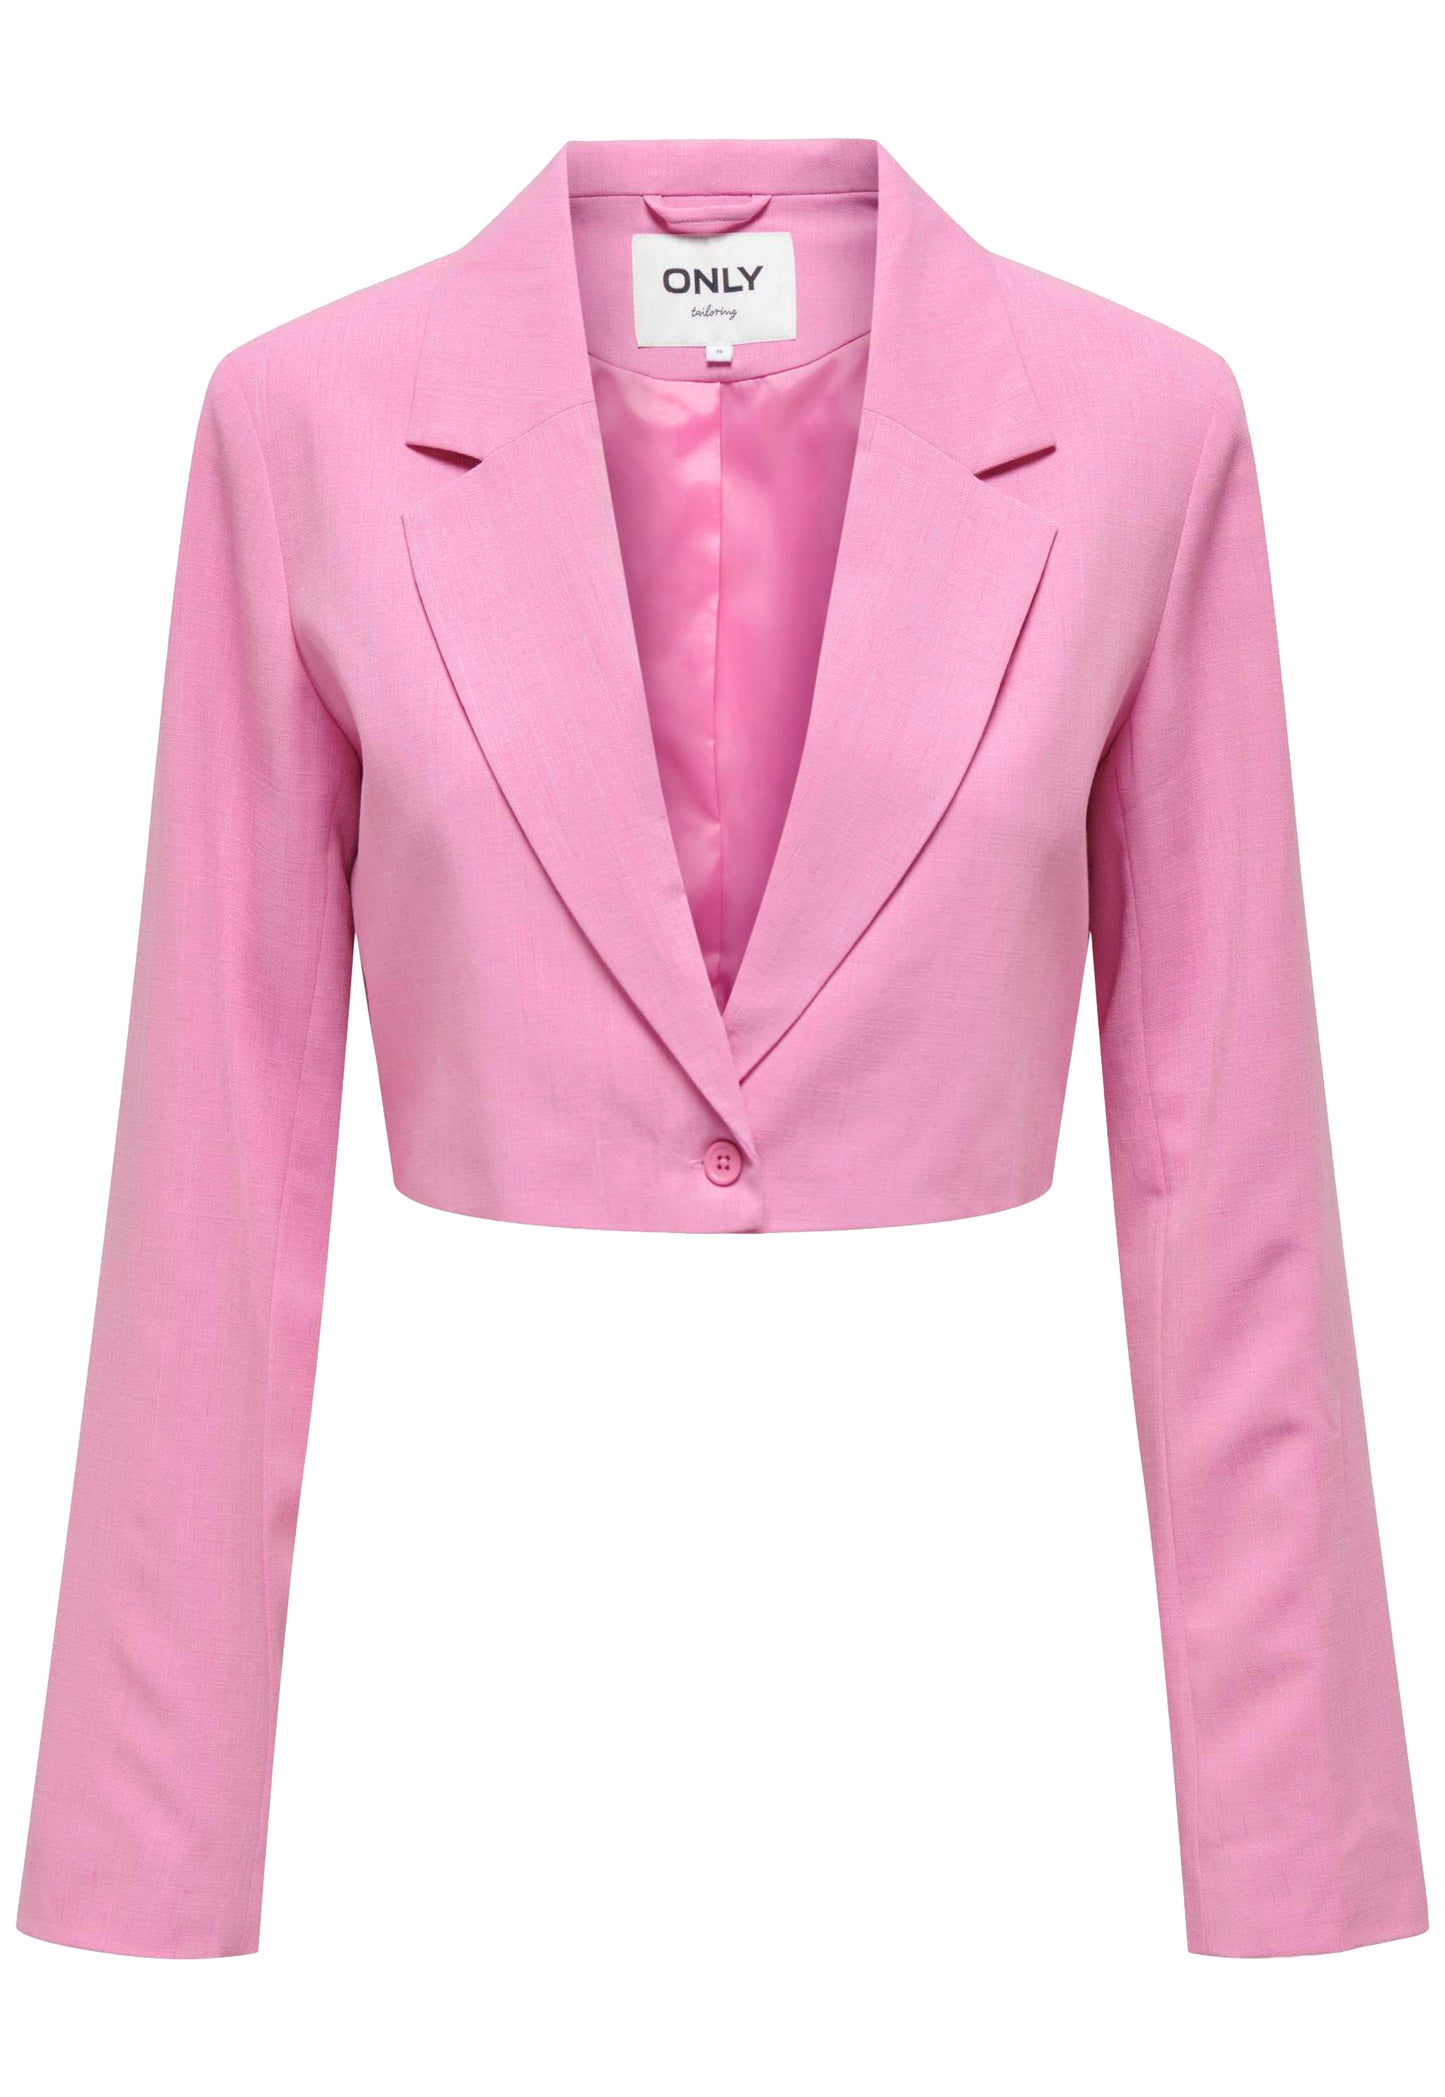 ONLY Brigitta Cropped Suit Co-ord Blazer in Pink - One Nation Clothing